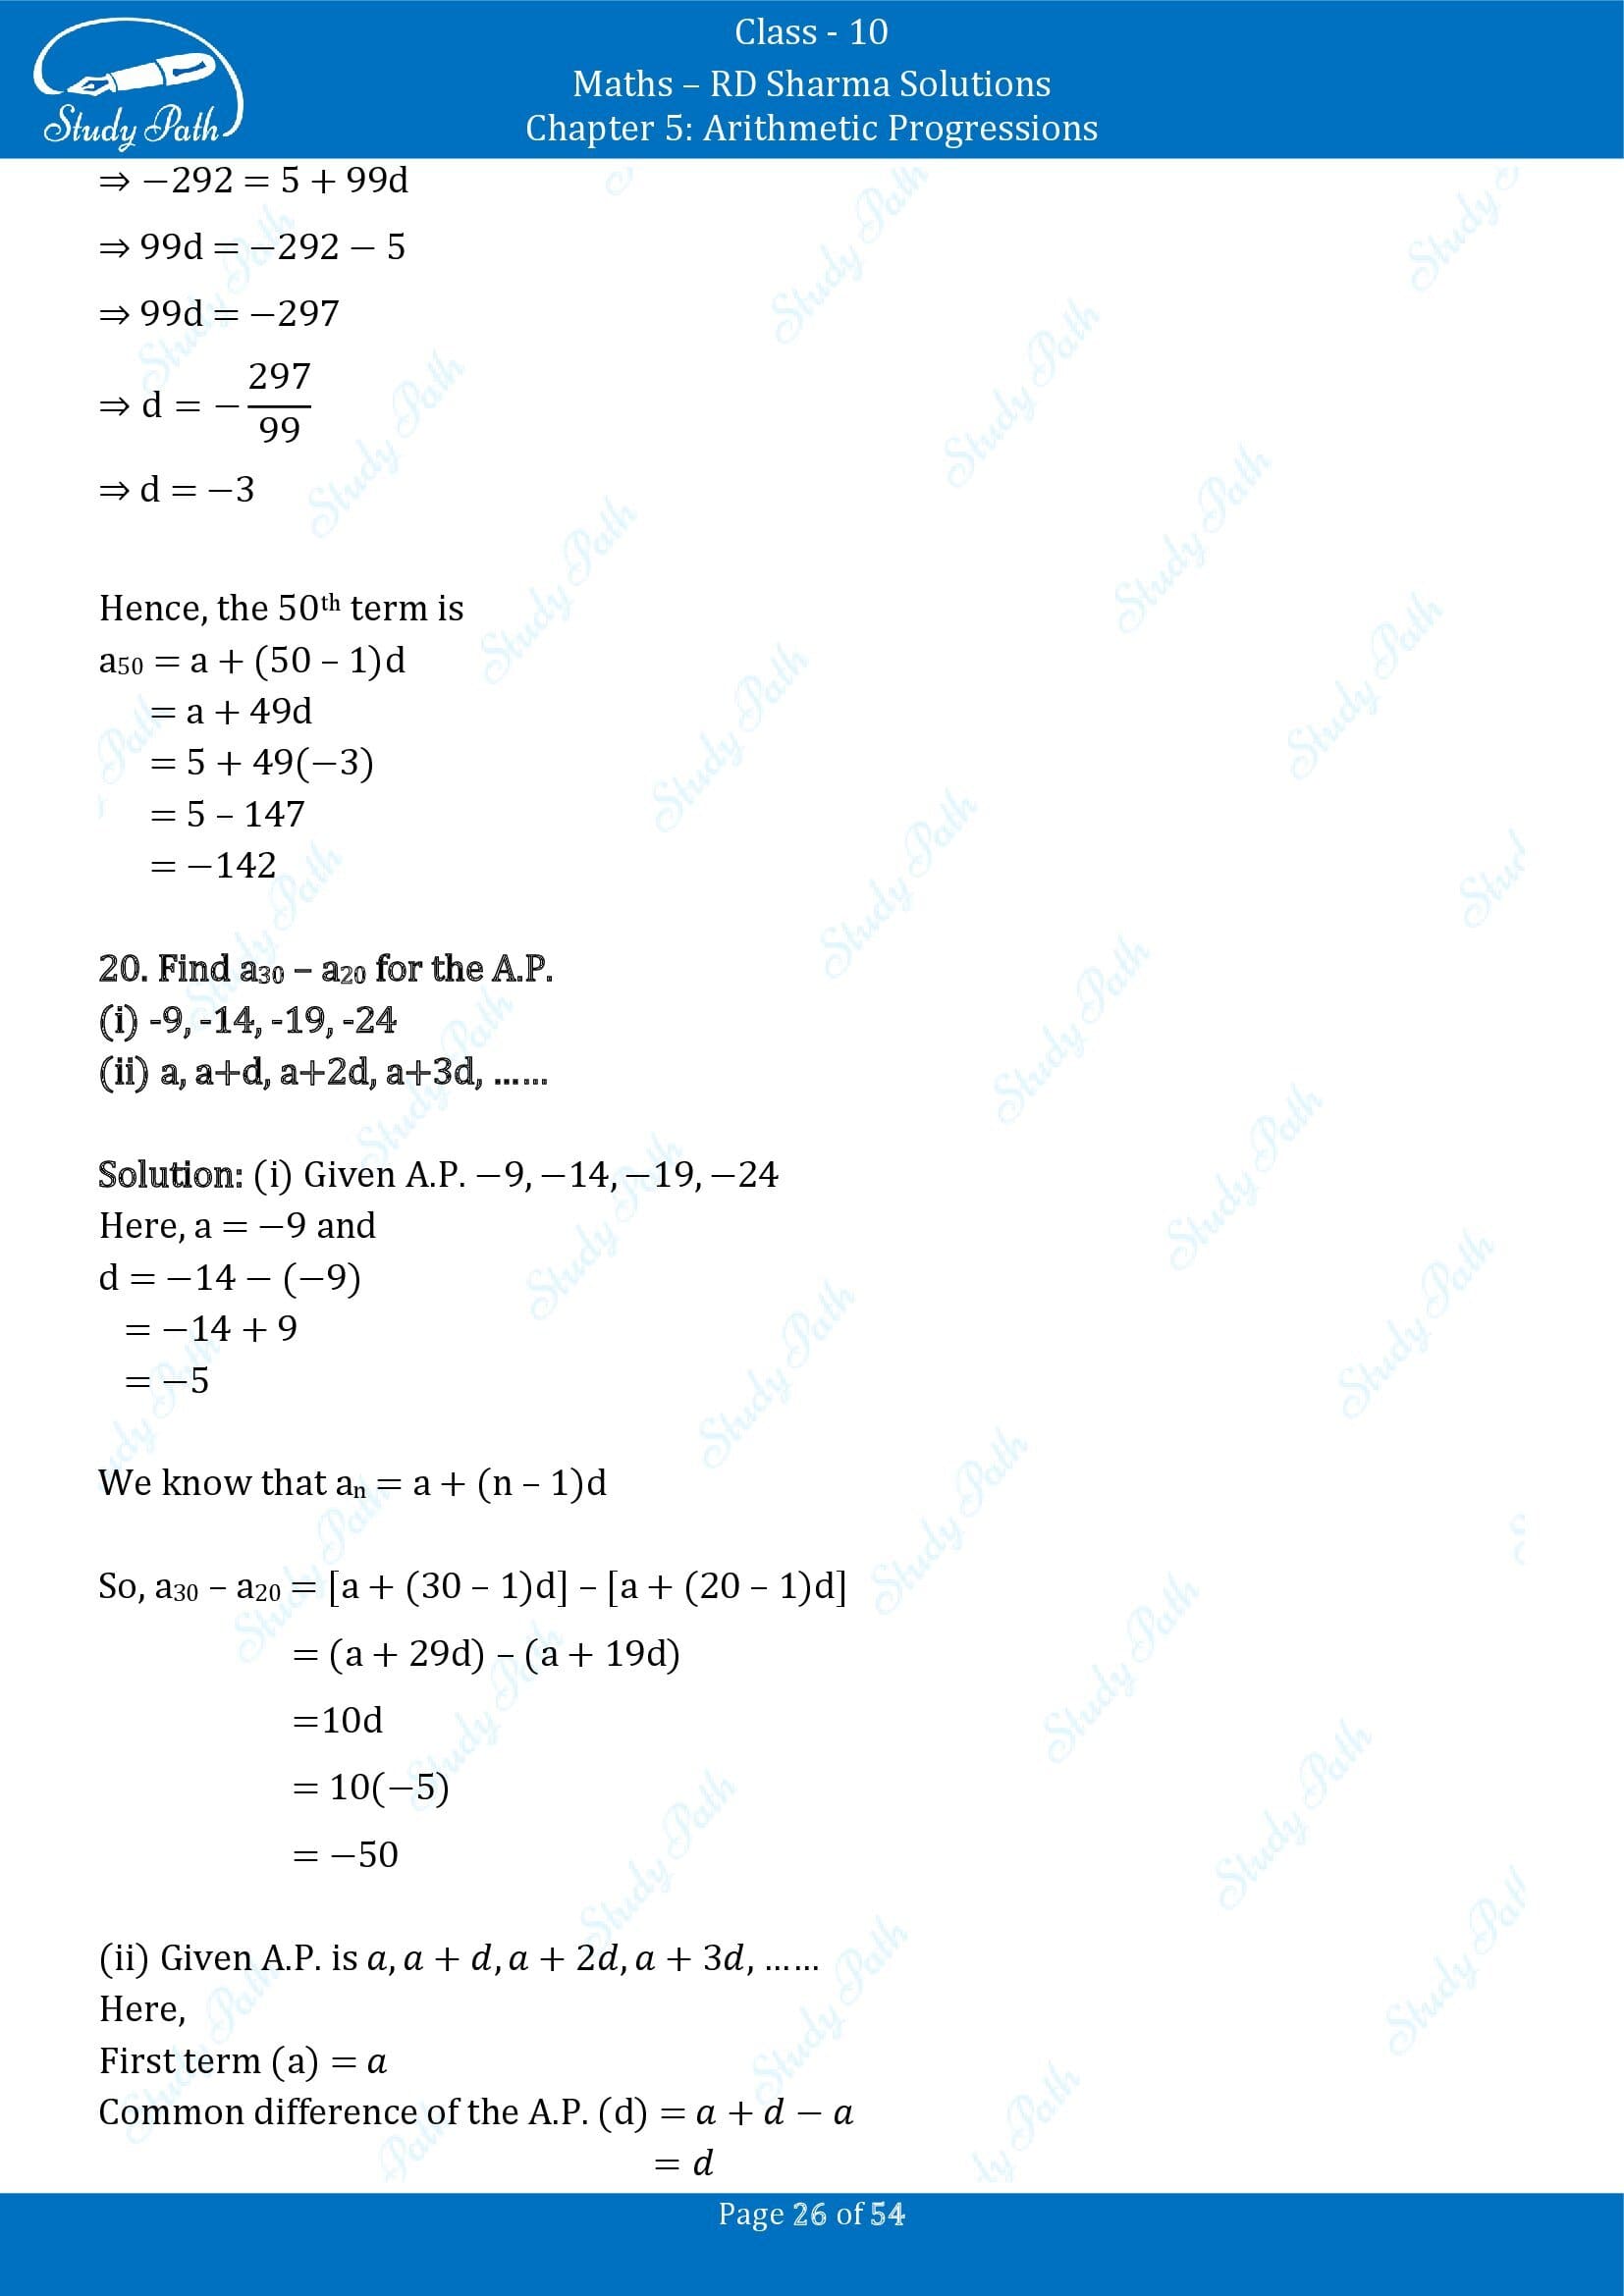 RD Sharma Solutions Class 10 Chapter 5 Arithmetic Progressions Exercise 5.4 00026